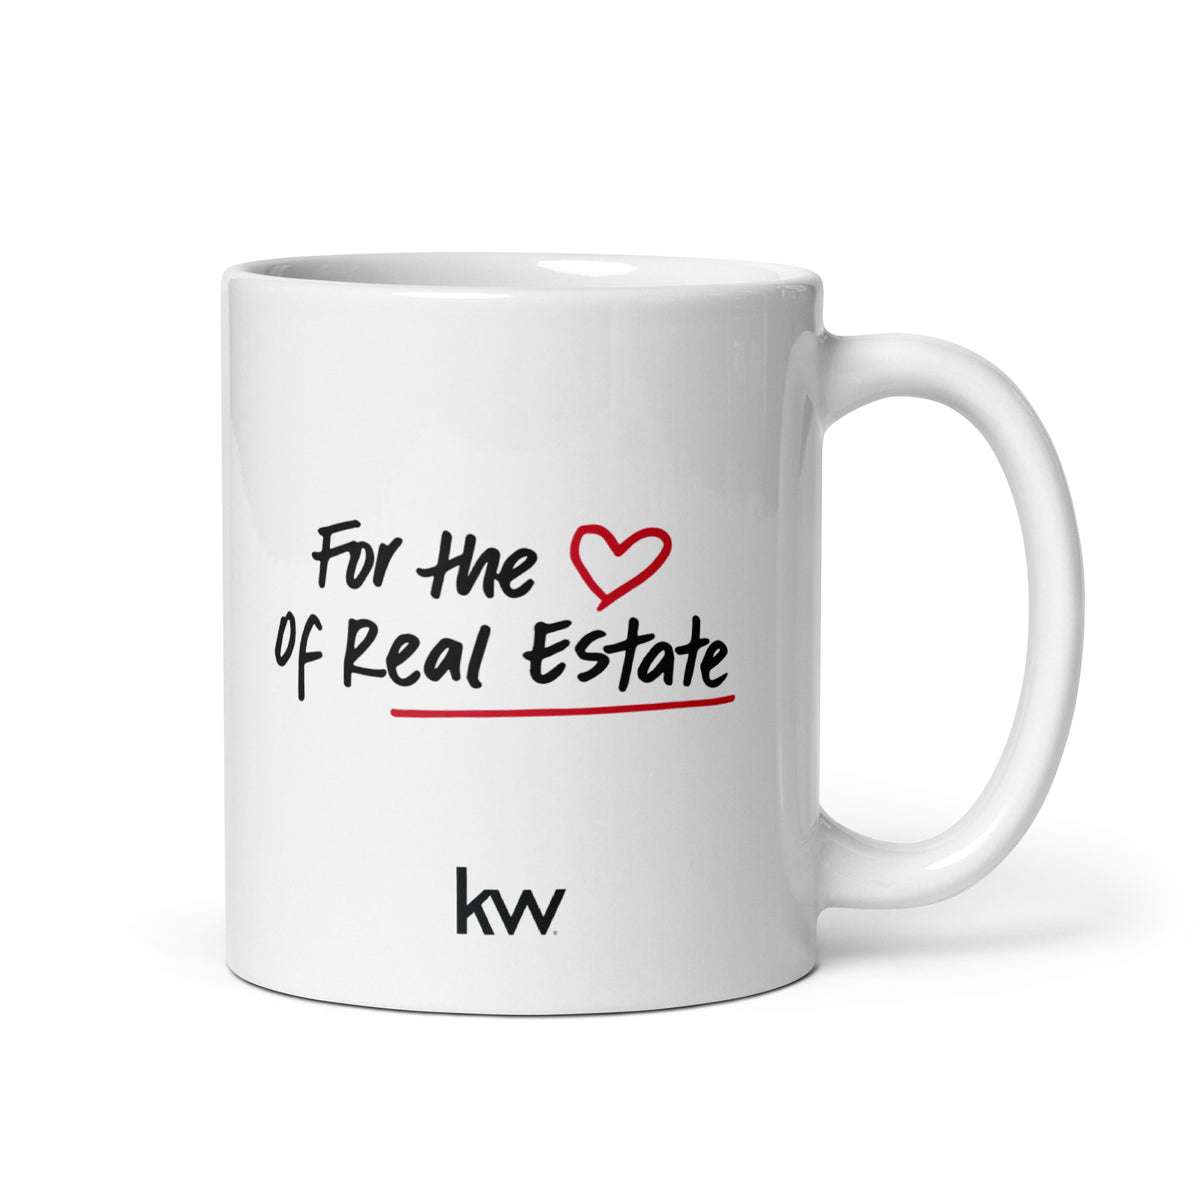 Mug - For the Love of Real Estate